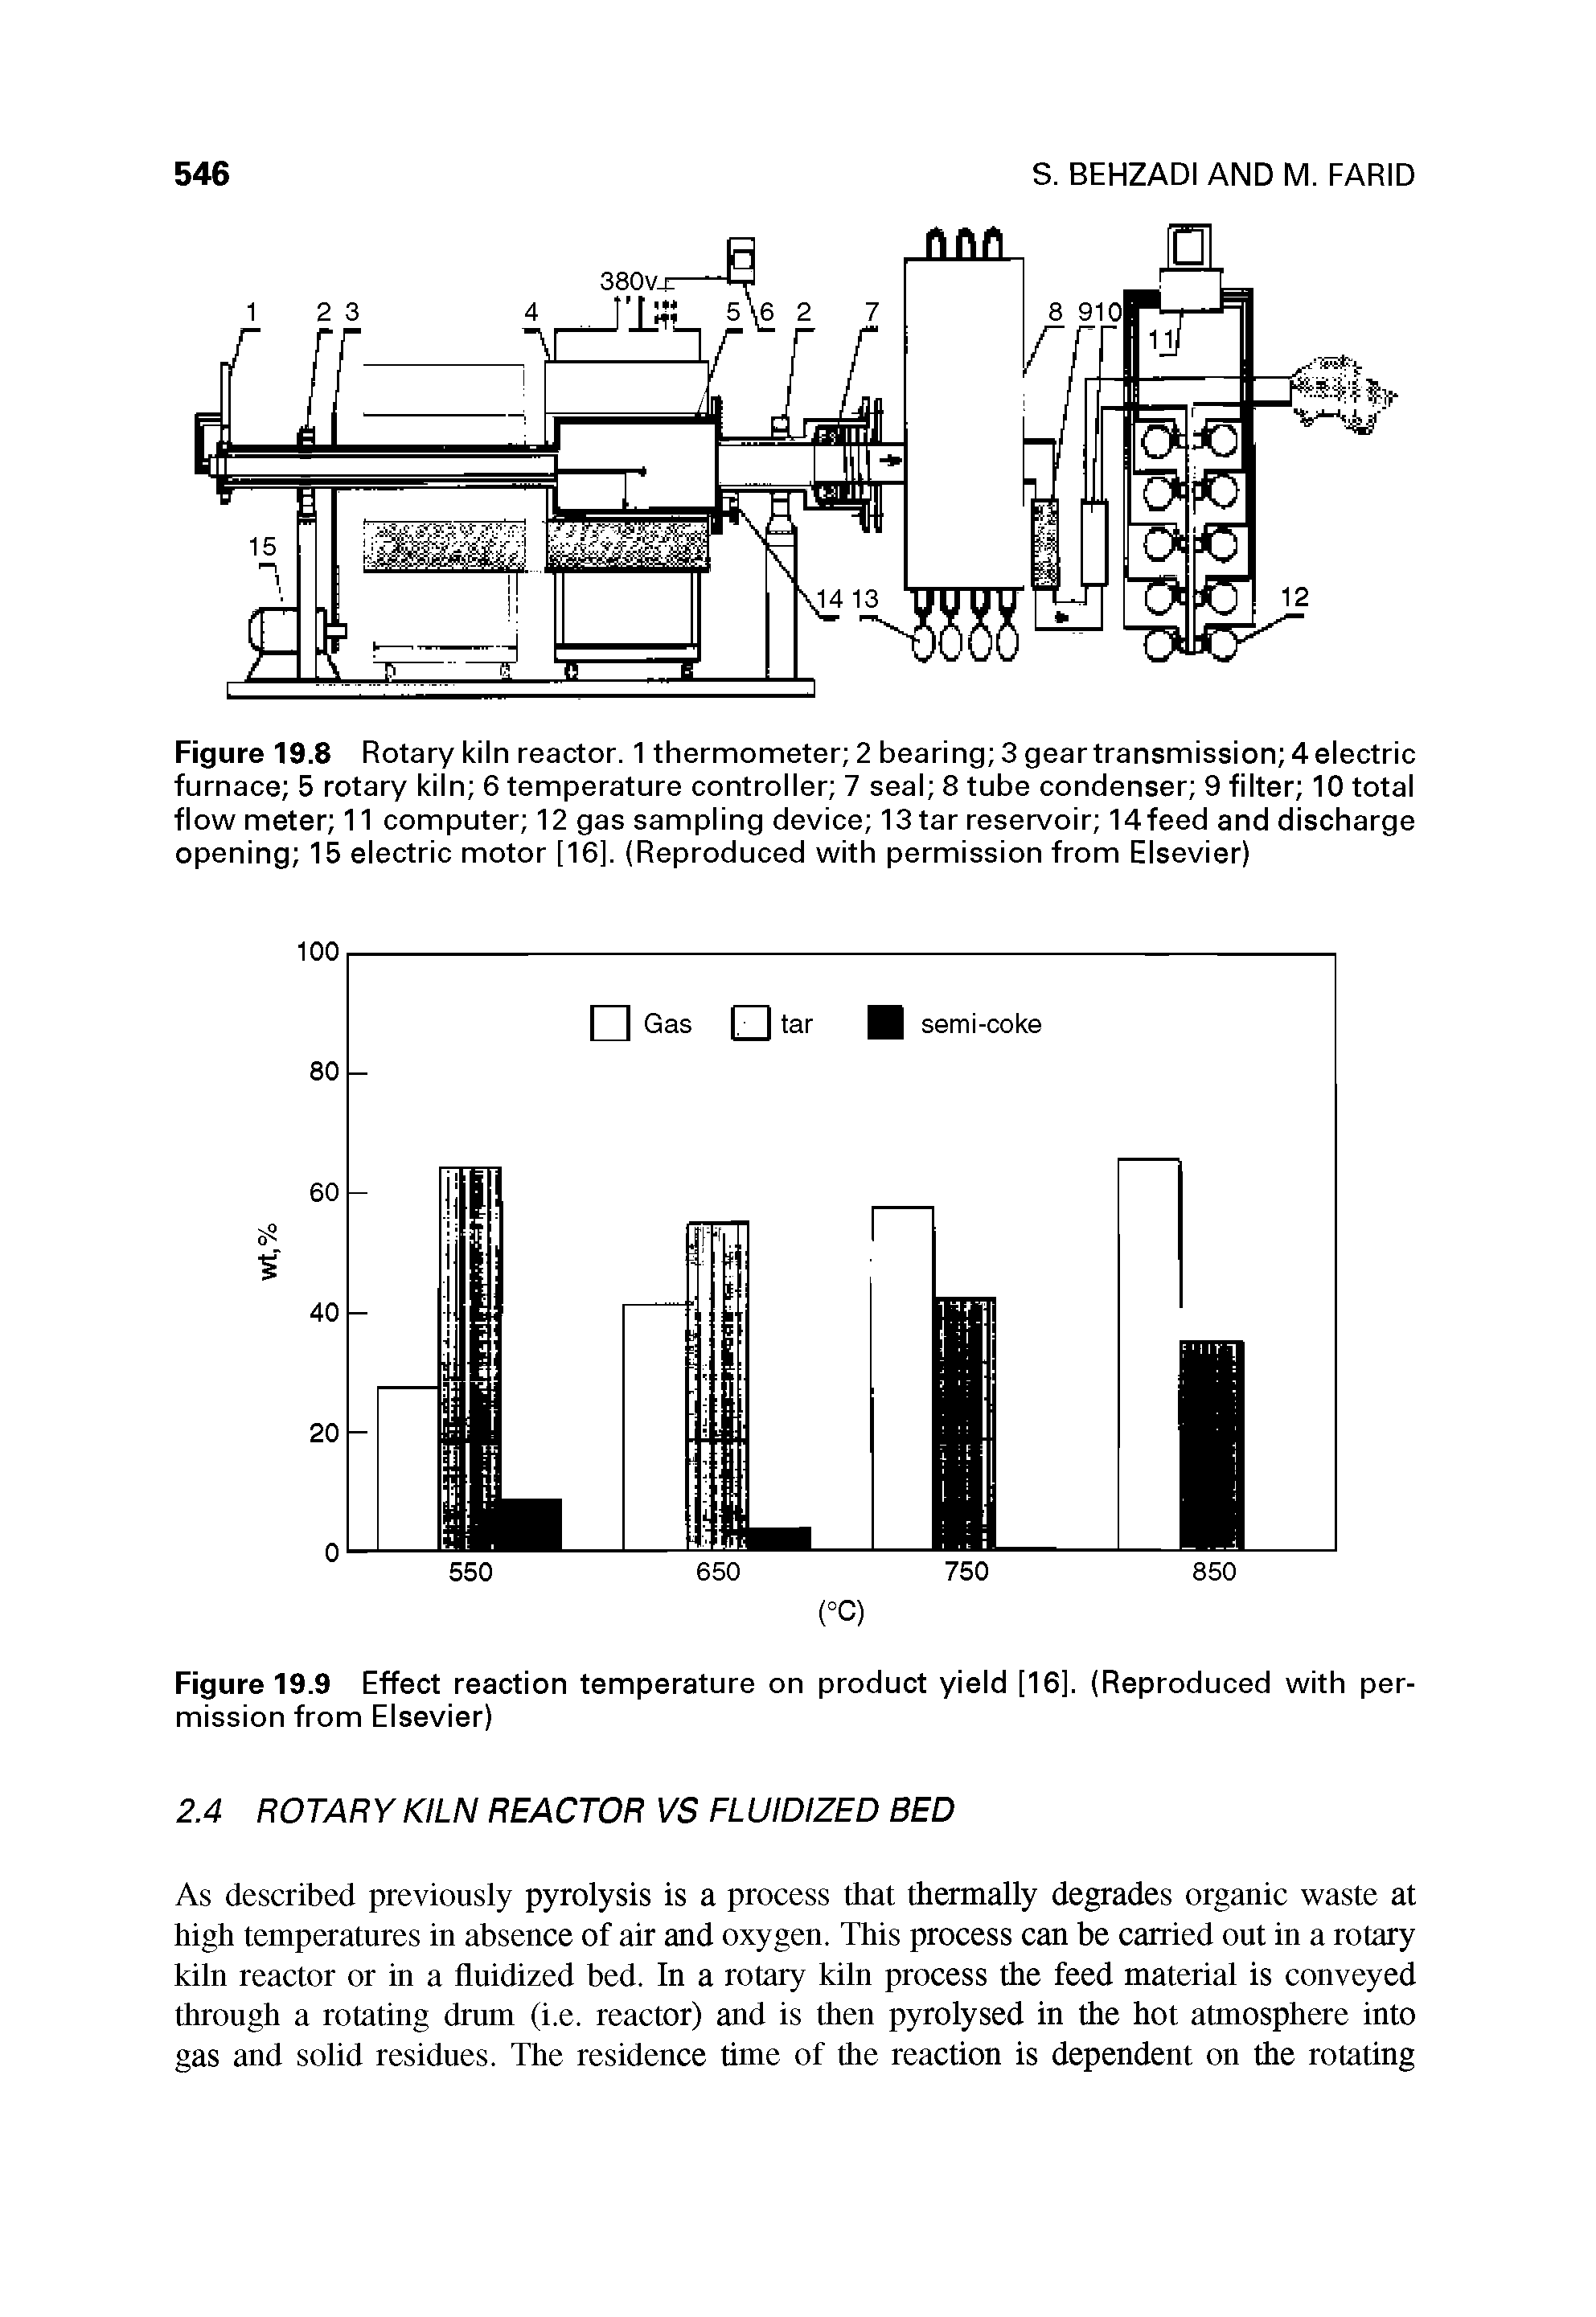 Figure 19.8 Rotary kiln reactor. 1 thermometer 2 bearing 3geartransmission 4electric furnace 5 rotary kiln 6 temperature controller 7 seal 8 tube condenser 9 filter 10 total flow meter 11 computer 12 gas sampling device 13 tar reservoir 14feed and discharge opening 15 electric motor [16]. (Reproduced with permission from Elsevier)...